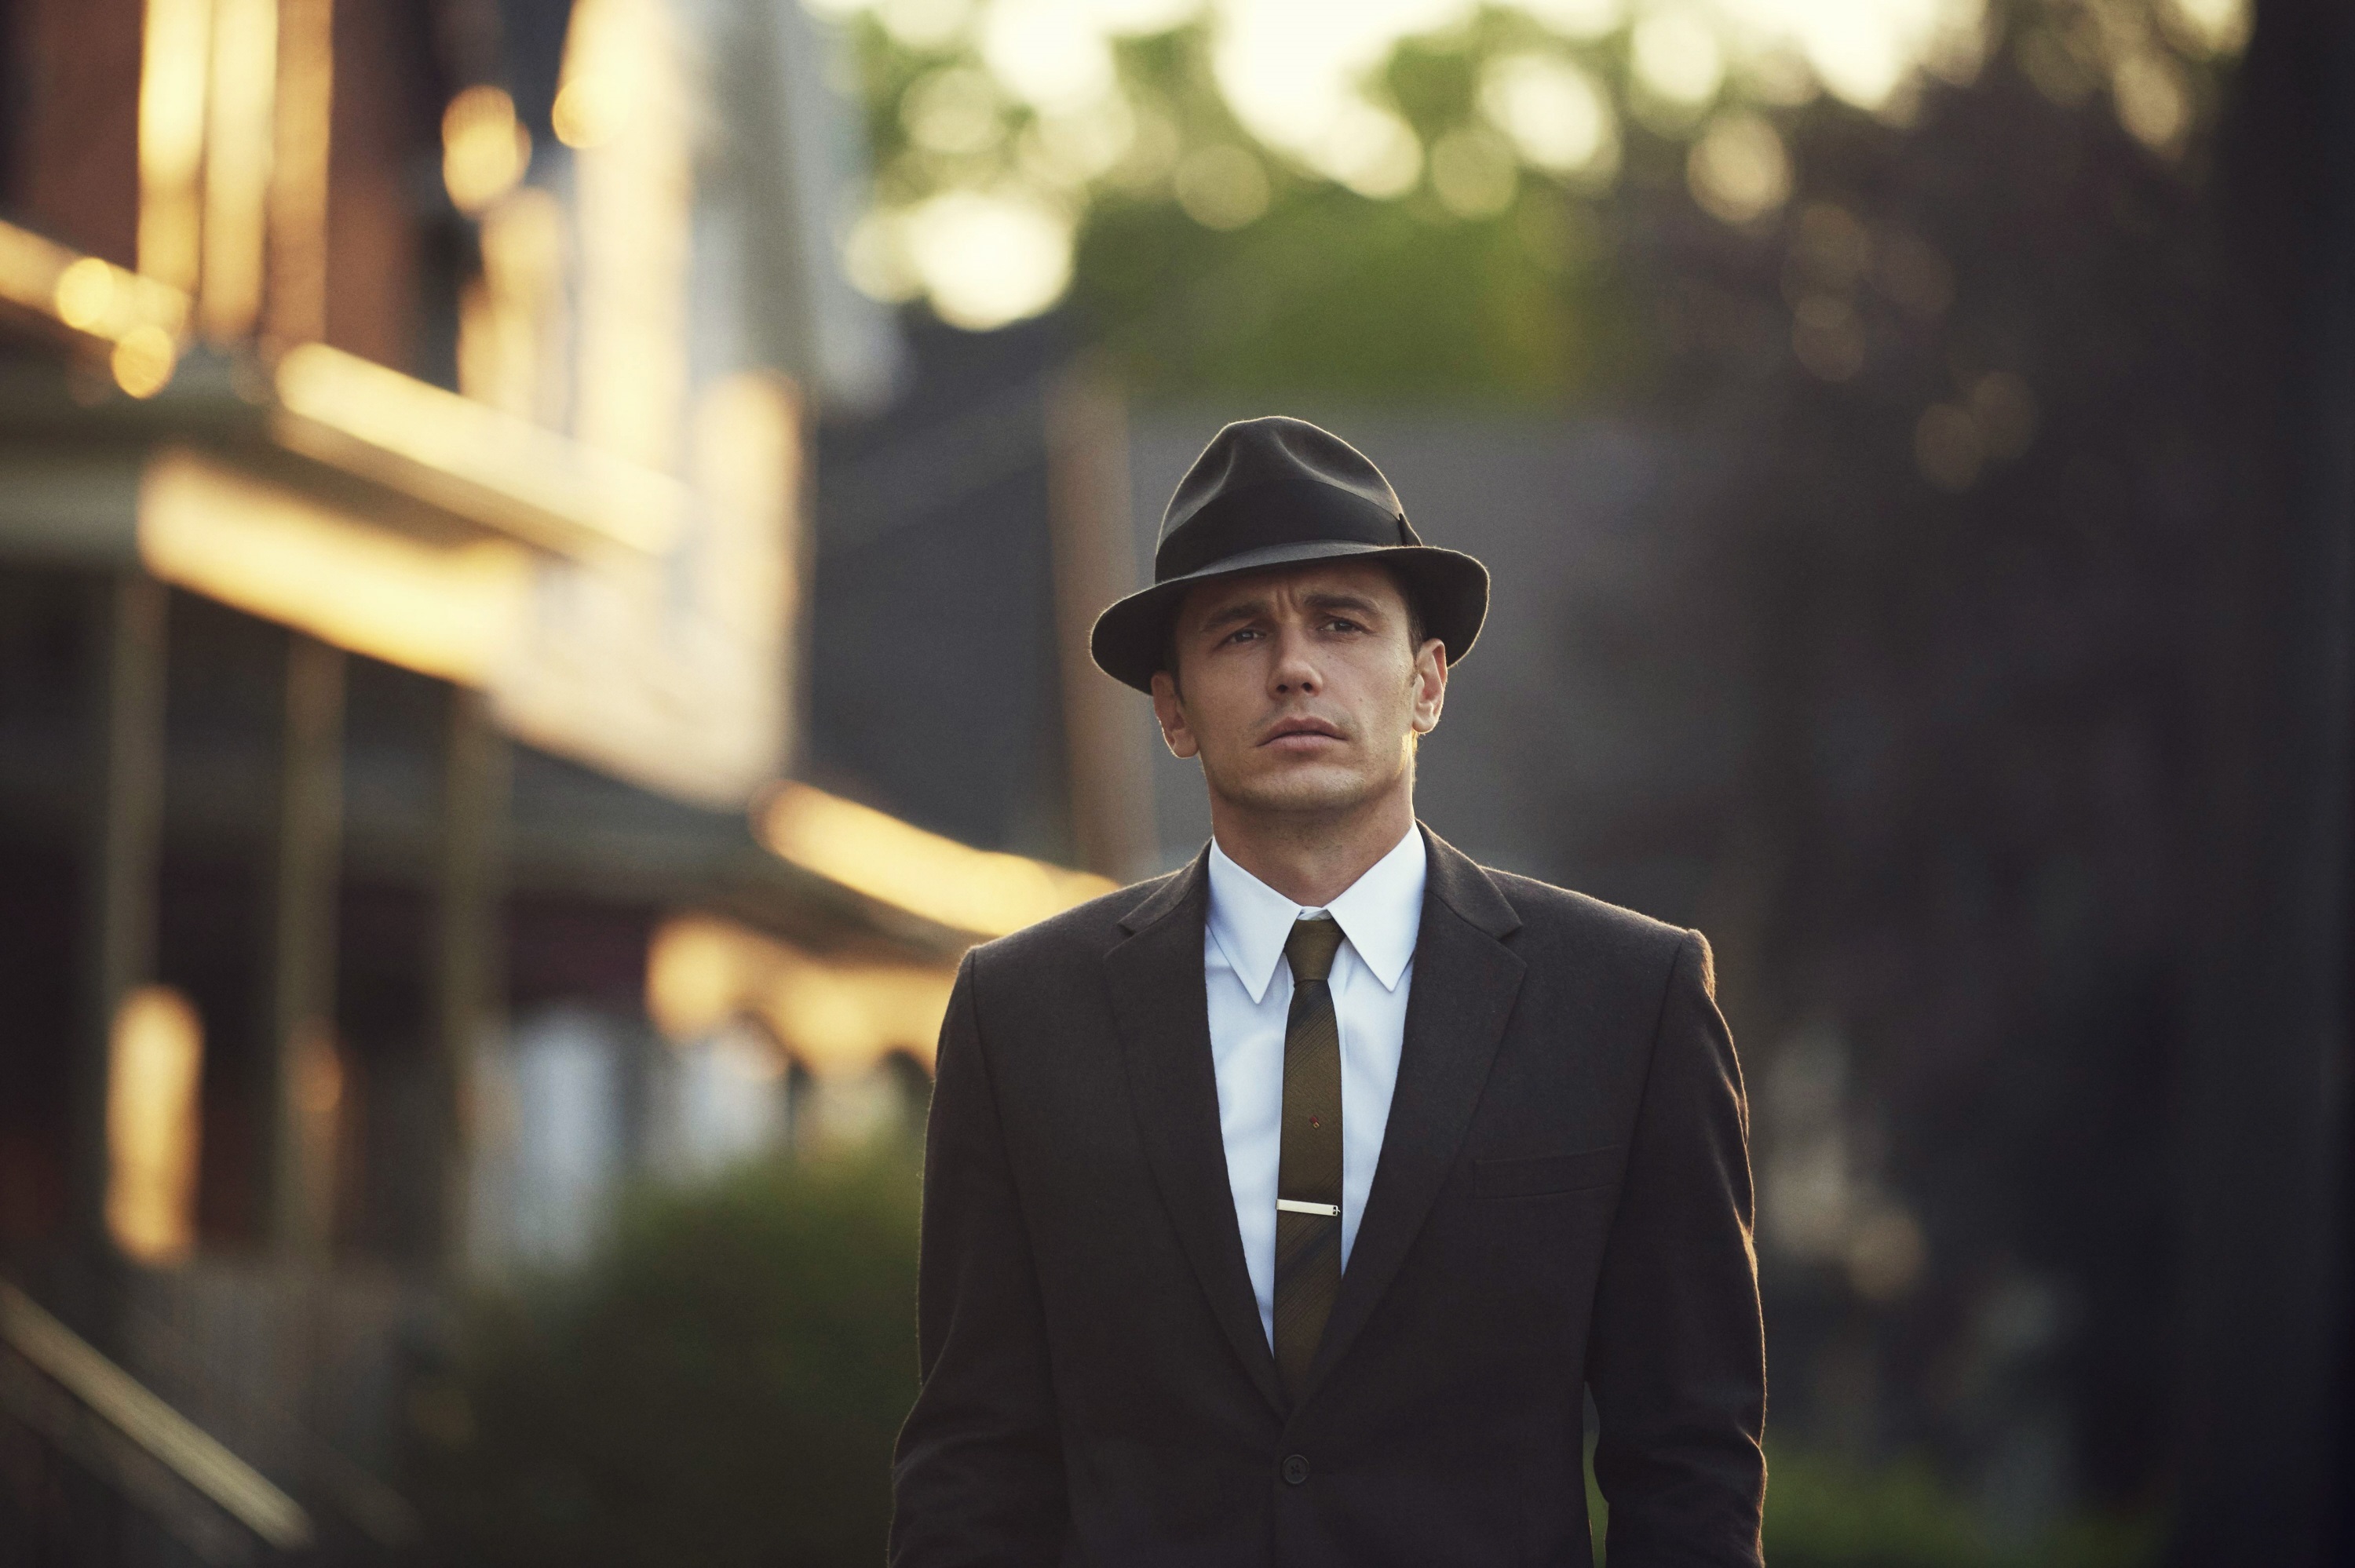 <p>"11.22.63" is the small-screen adaption of the Stephen King sci-fi historical thriller about one man's journey back in time to stop the assassination of President John F. Kennedy. The 2016 Hulu show starred <a href="https://www.wonderwall.com/celebrity/profiles/overview/james-franco-301.article">James Franco</a> as Jake Epping, a modern-day high school English teacher who is suddenly charged with the task of changing history by walking through a secret time portal into the past.</p>